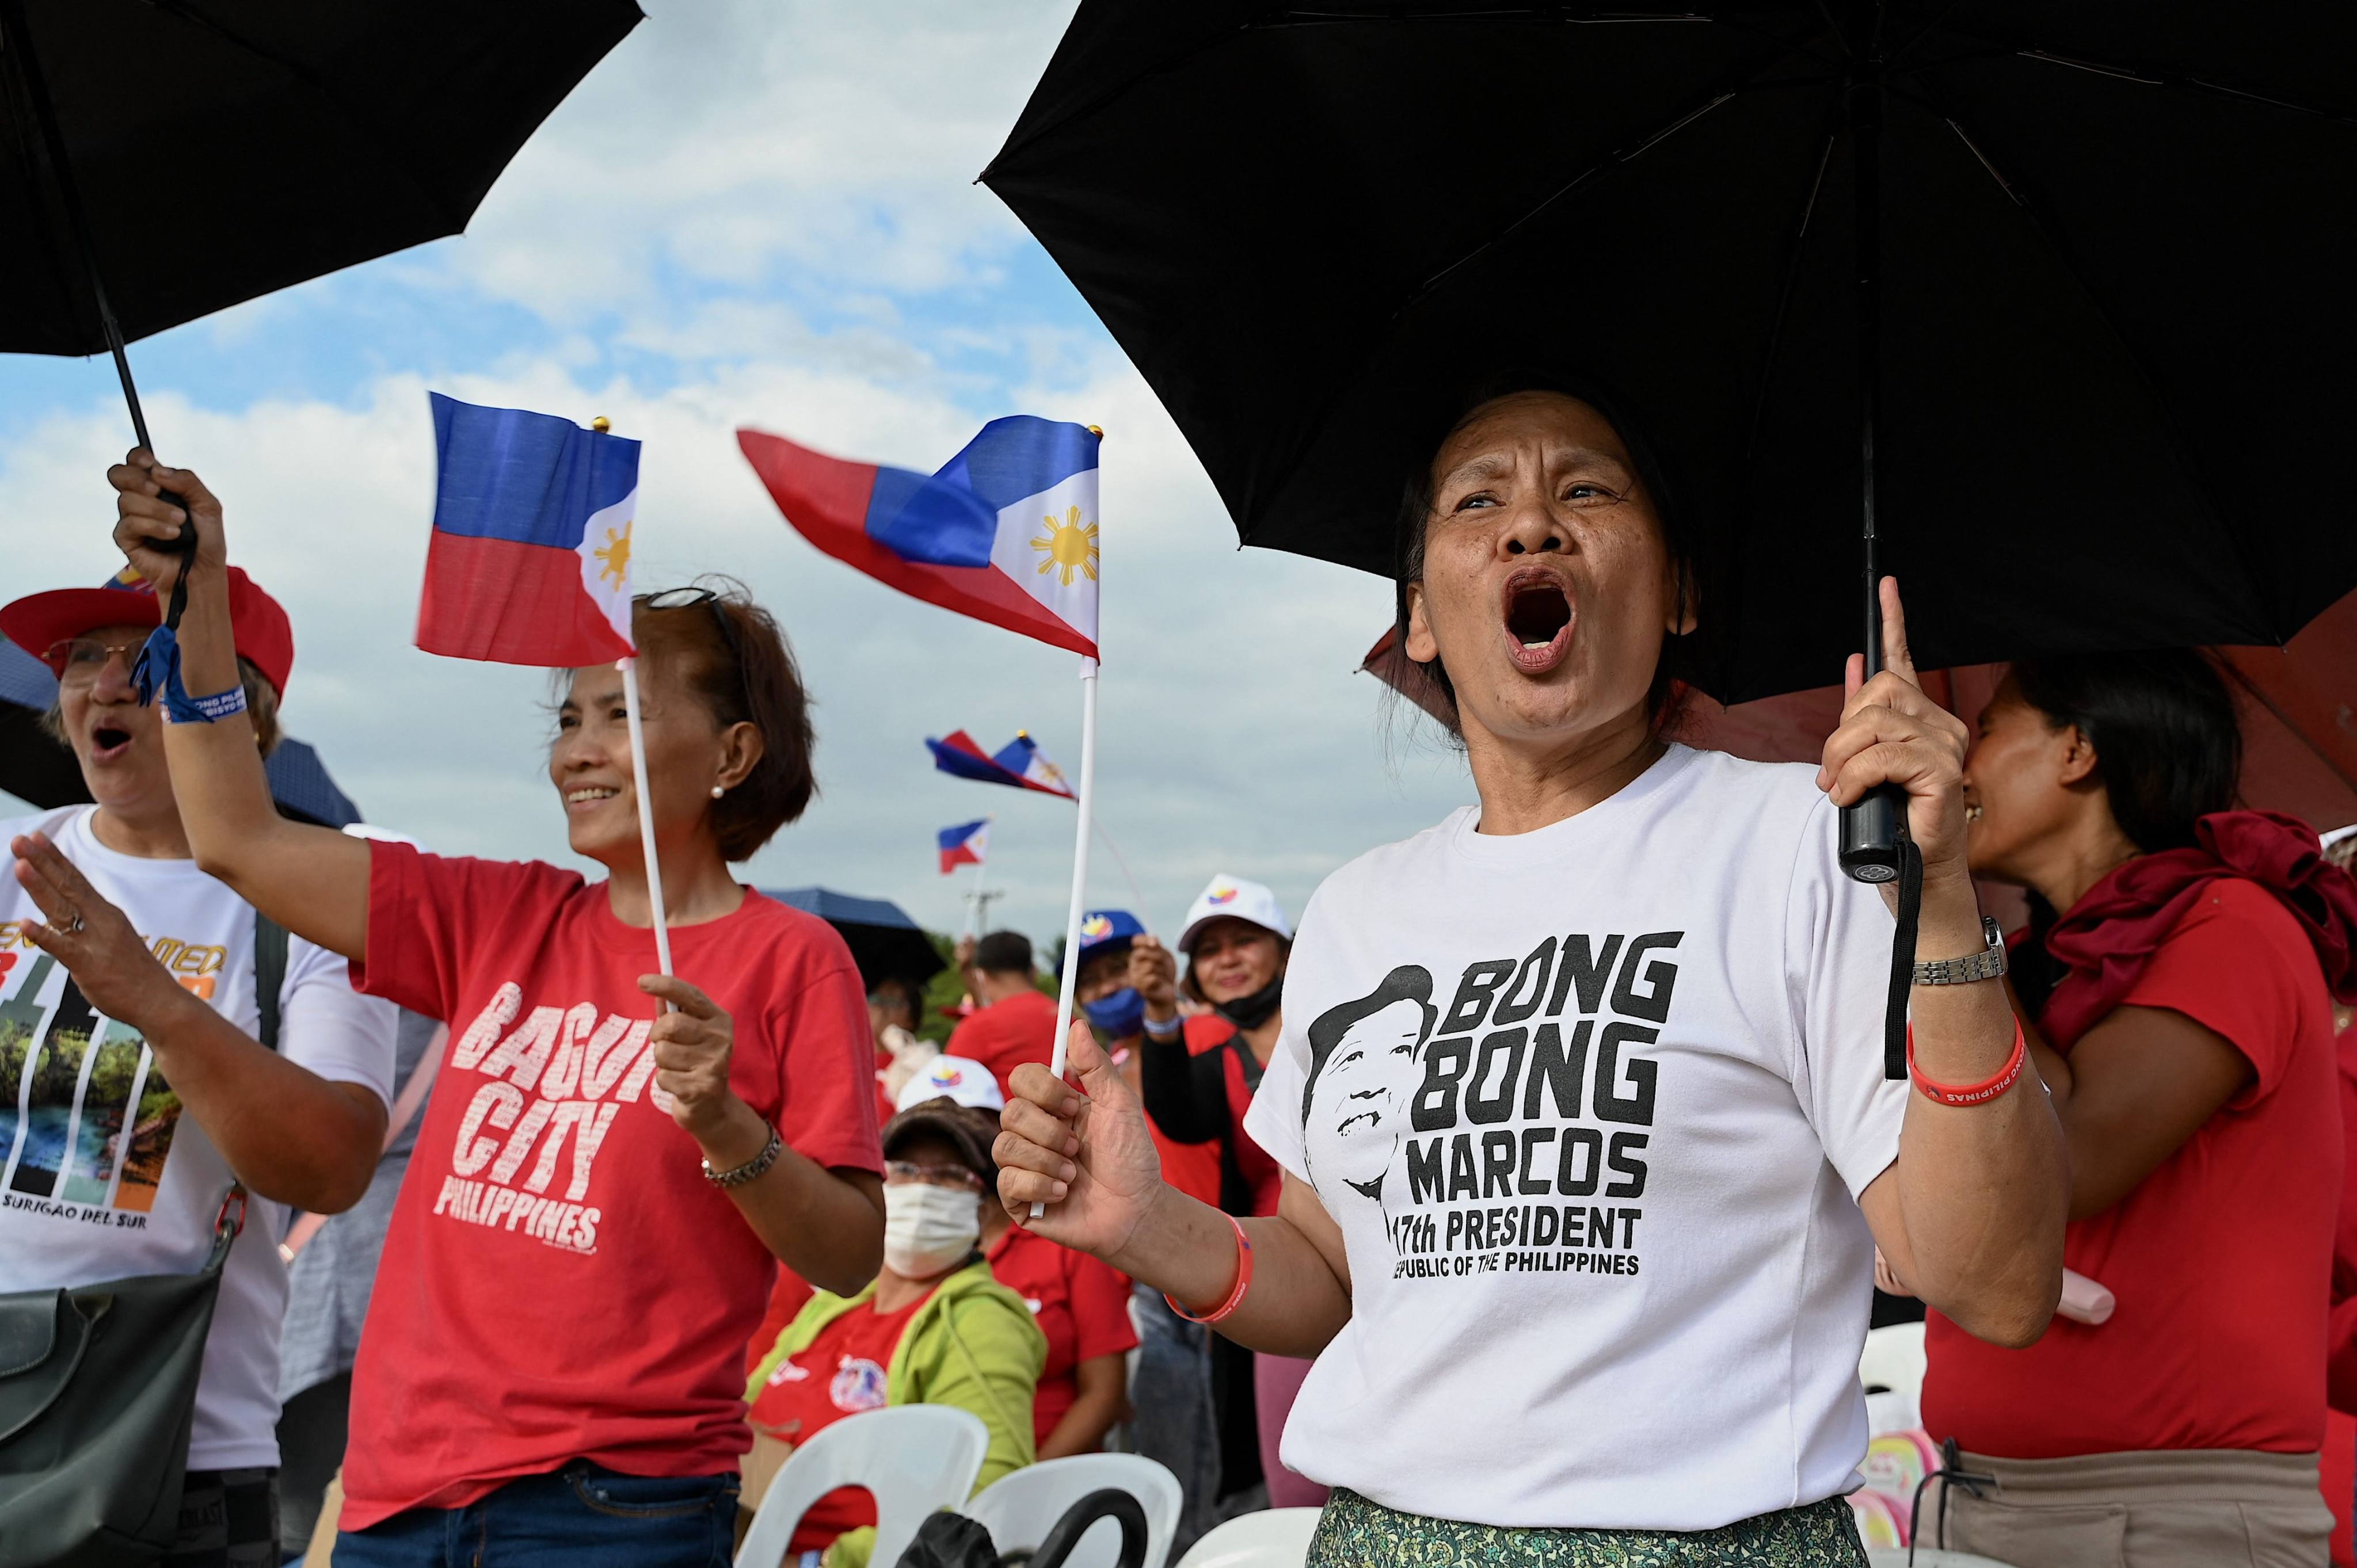 Supporters of Philippine President Ferdinand Marcos Jnr attend the kick-off rally for the New Philippines movement at Quirino Grandstand in Manila on January 28. Photo: AFP